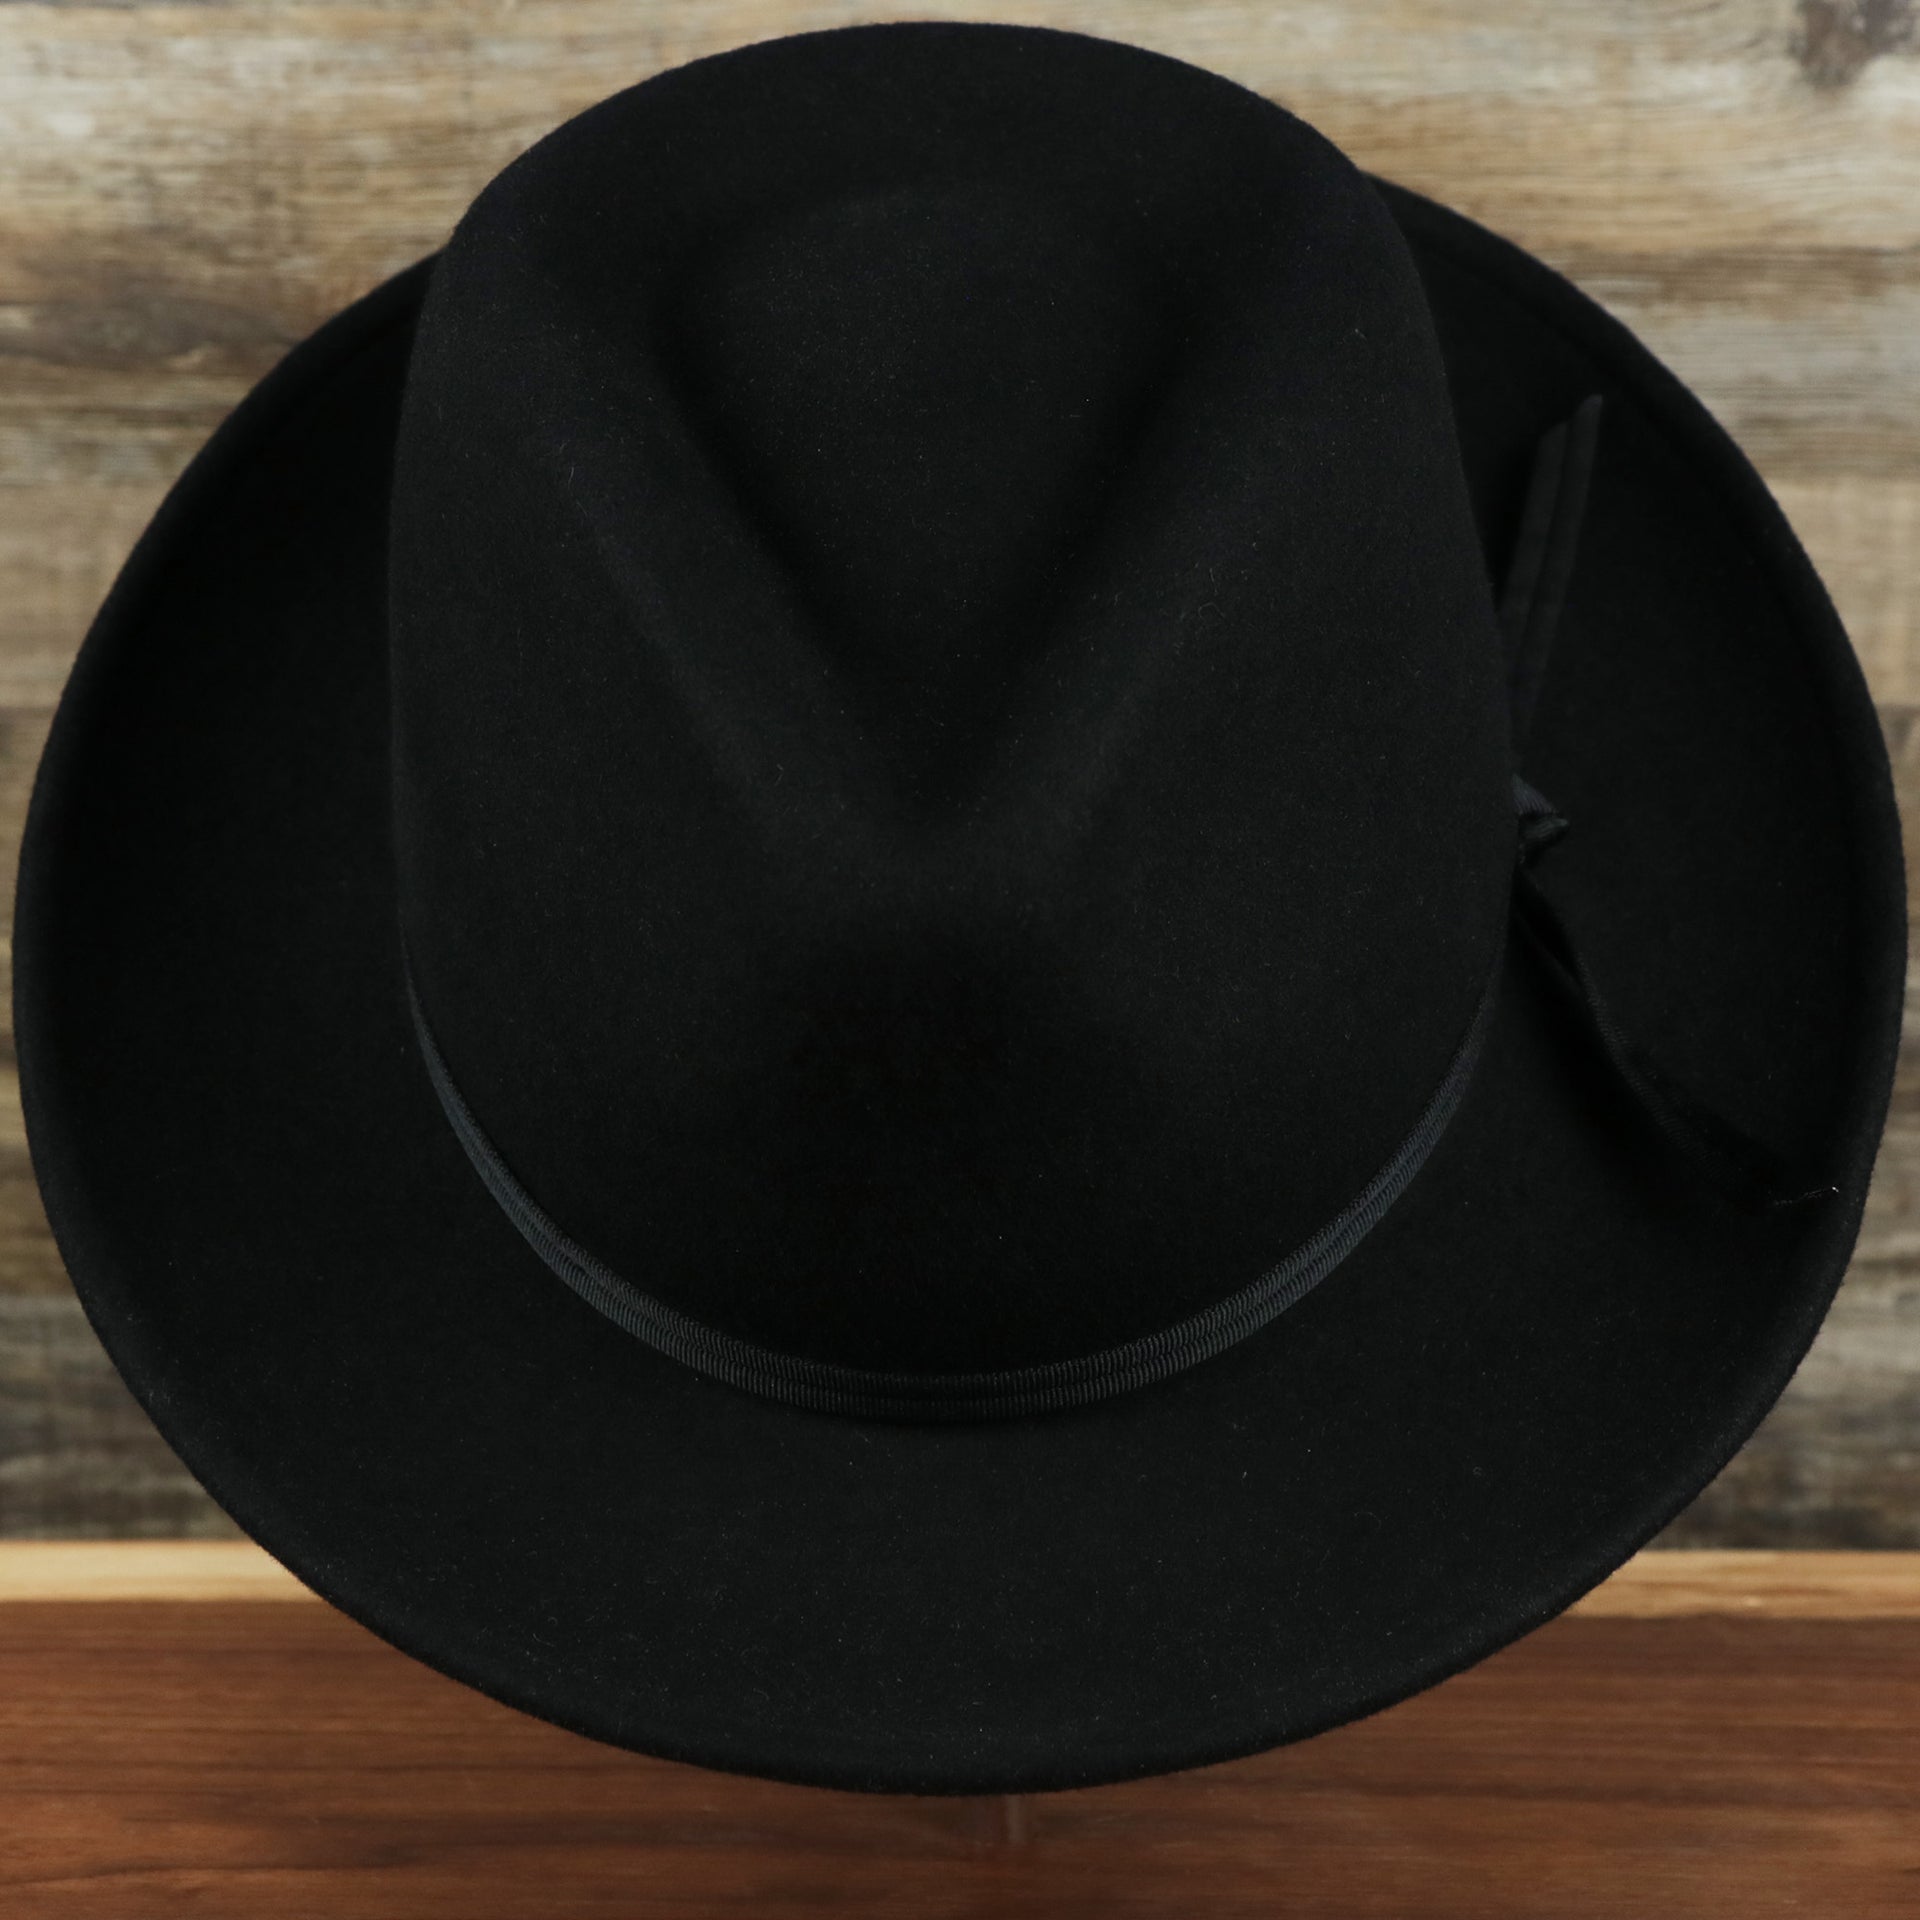 an overhead view of the Small Brim Folded Edge Black Fedora Hat with Black Wool Interior | Jack and Arrow 100% Australian Wool